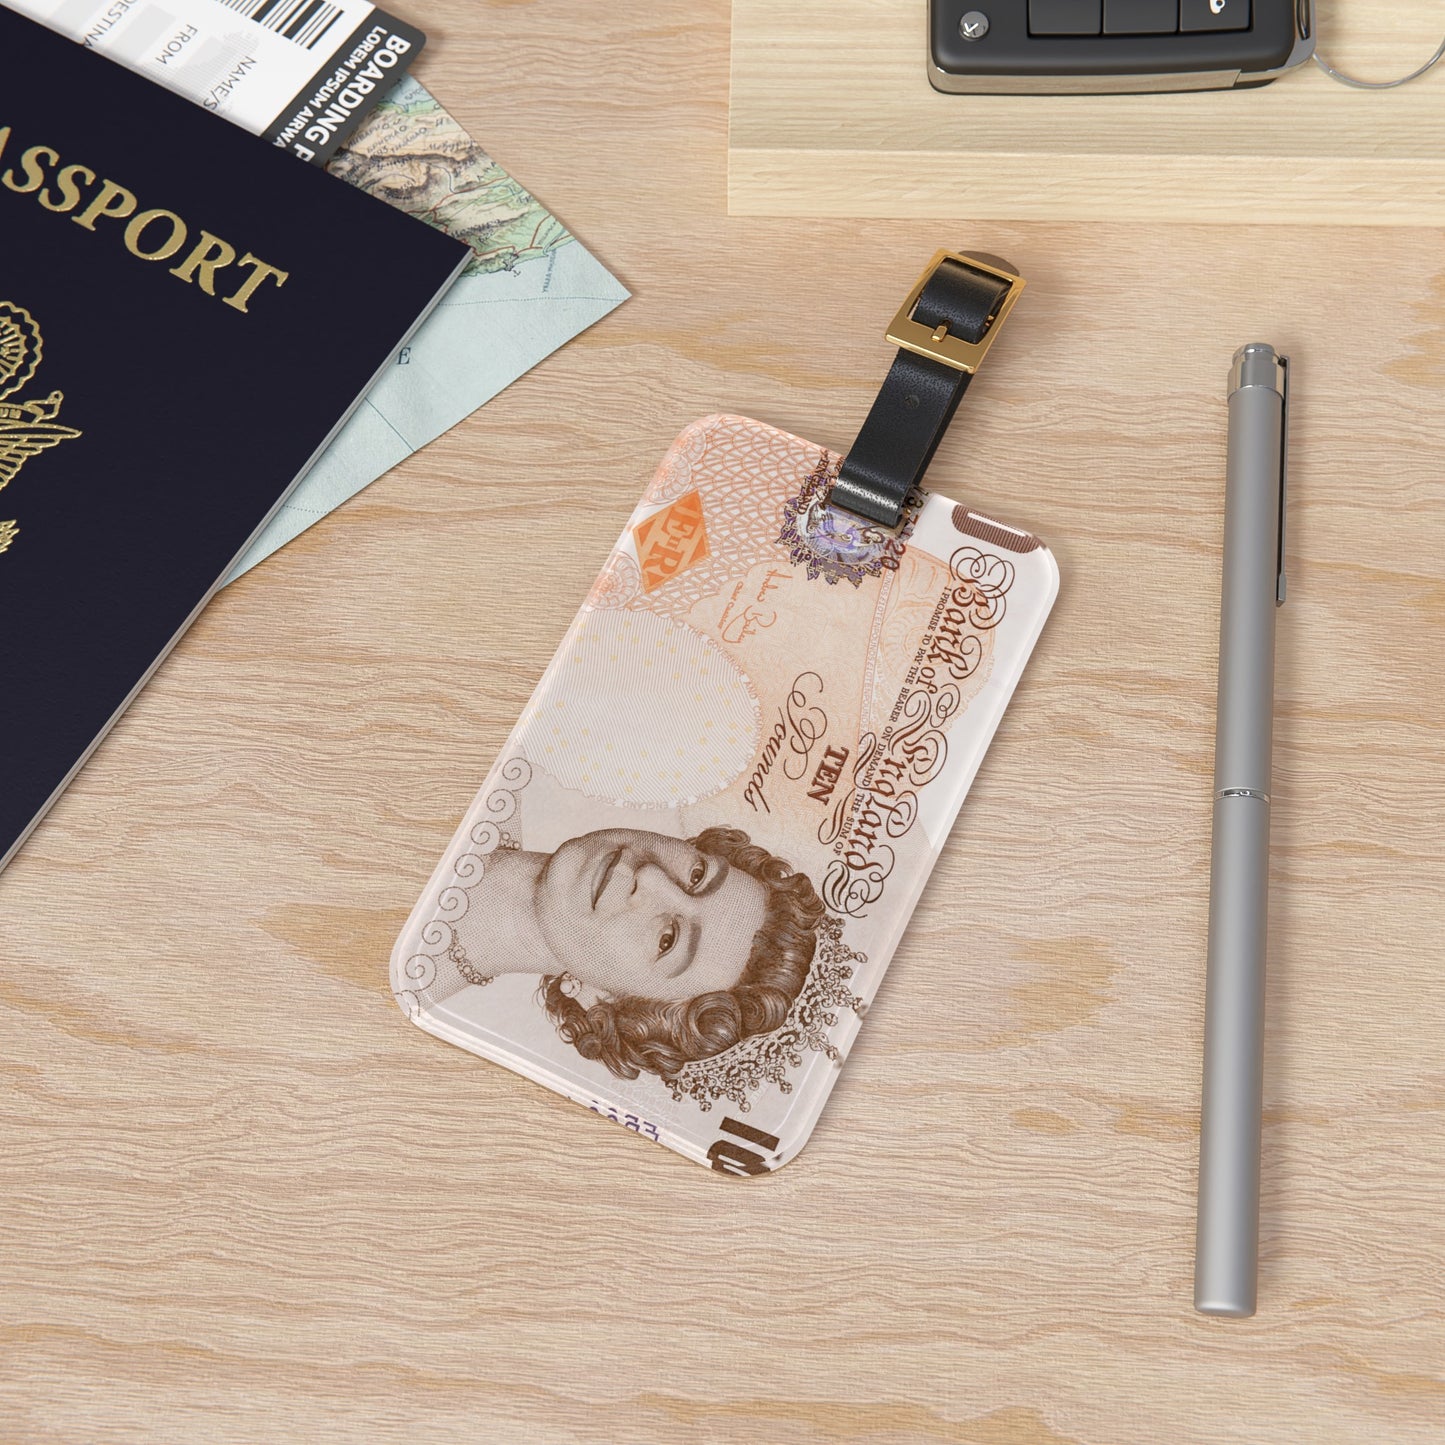 Currency UK Pounds London Luggage Tag